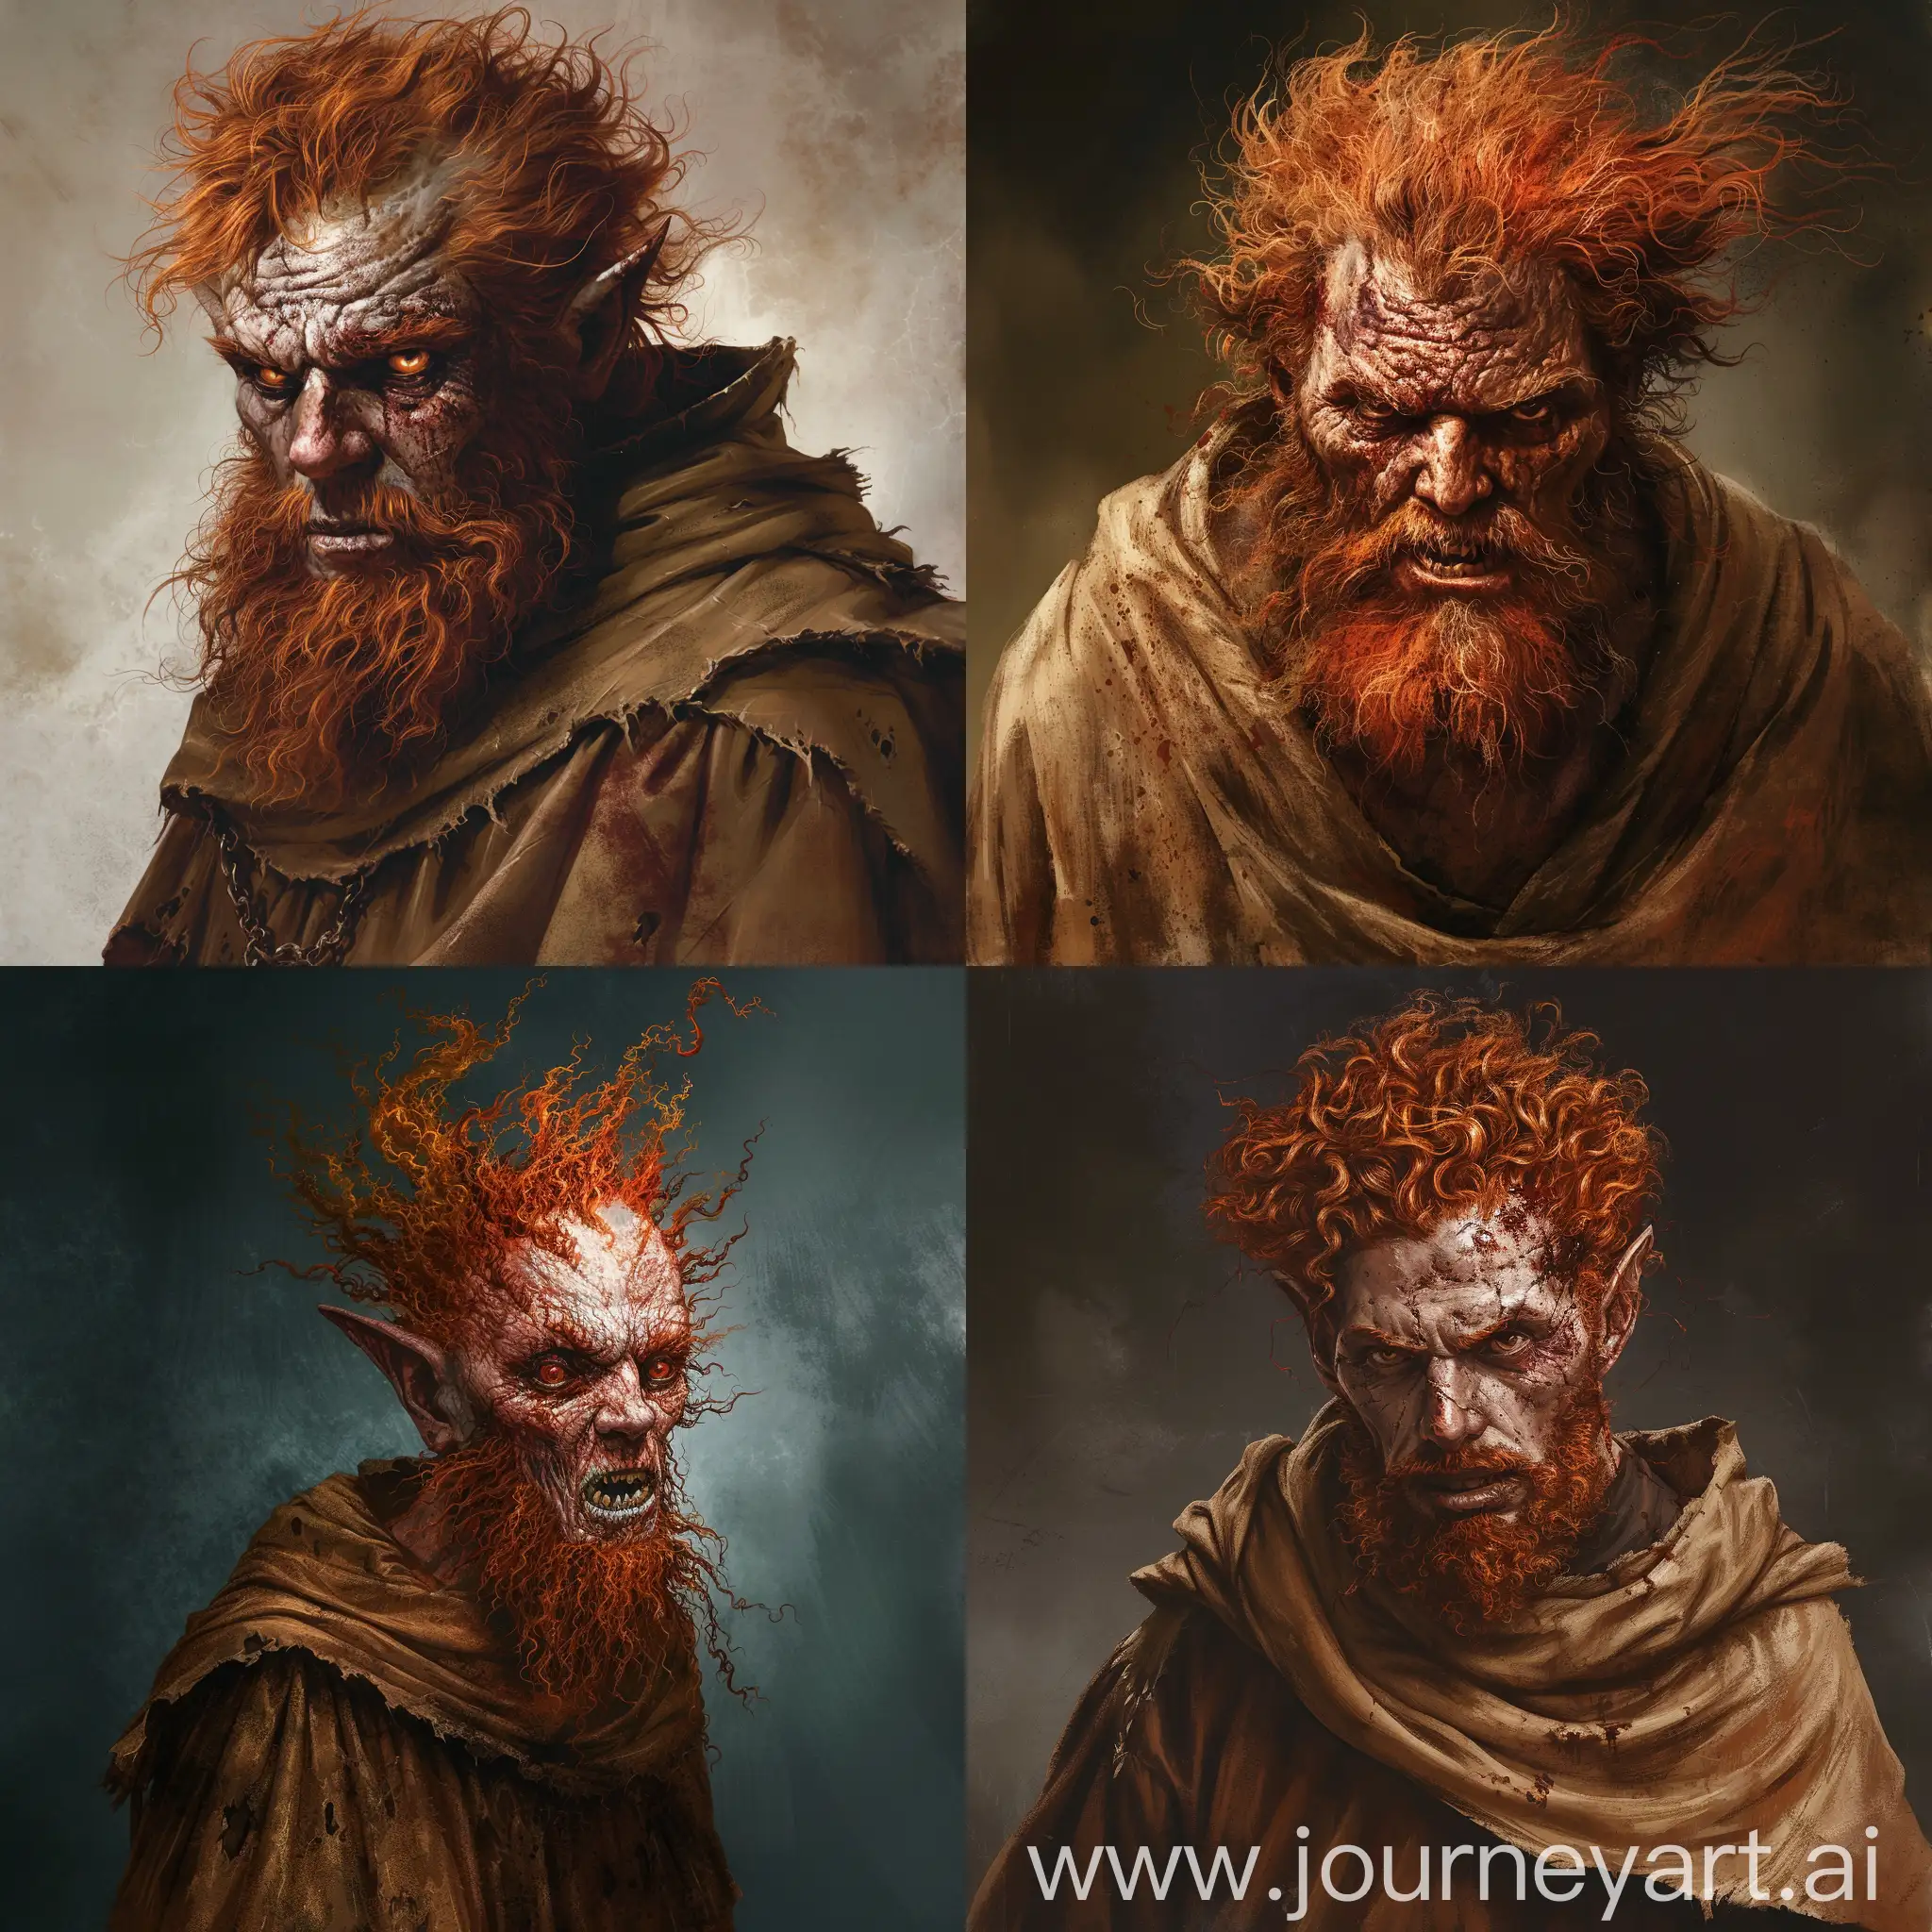 In the desolate expanse of forgotten realms, there dwells Azazel, a fallen Grigori angel, now an aged figure shrouded in madness and despair. His once-fiery red hair now matted and unkempt, cascading like flames down his weathered face, while a tangled beard of the same hue frames his twisted visage in a crimson embrace.

Clad in a tattered brown cloak that hangs loosely upon his emaciated frame, Azazel appears as a spectral wanderer lost in the depths of his own madness. His eyes, once ablaze with celestial light, now burn with a feverish intensity, reflecting the torment of his eternal damnation.

With every ragged breath, he emits a guttural growl, a sound that echoes the depths of his fractured mind. His features, though human, are contorted into a grimace of madness, his mouth twisted into a snarl that reveals jagged teeth stained with the remnants of countless sins.

As he roams the barren wastelands of his exile, Azazel leaves a trail of chaos and despair in his wake, his presence a harbinger of doom for any who dare to cross his path. Yet, amidst the madness that consumes him, there lingers a faint echo of the angel he once was—a tragic reminder of the fallibility of even the most celestial beings.